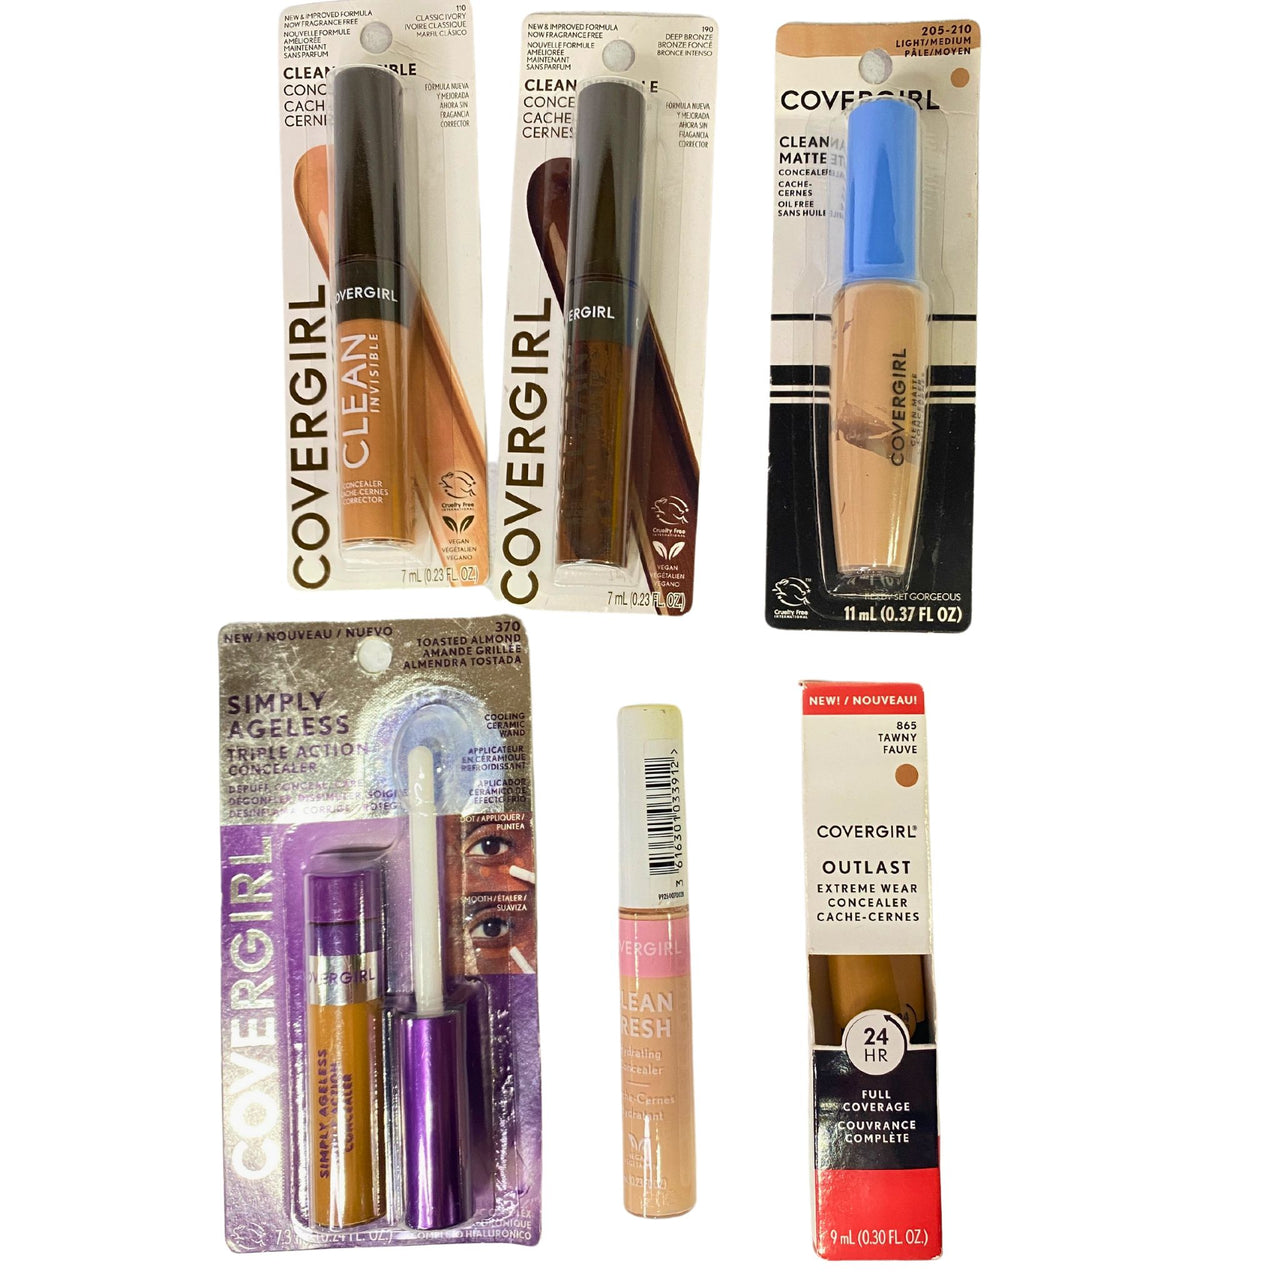 Covergirl Concealers Assorted Mix includes Hydrating , Matte , Assorted Shades 